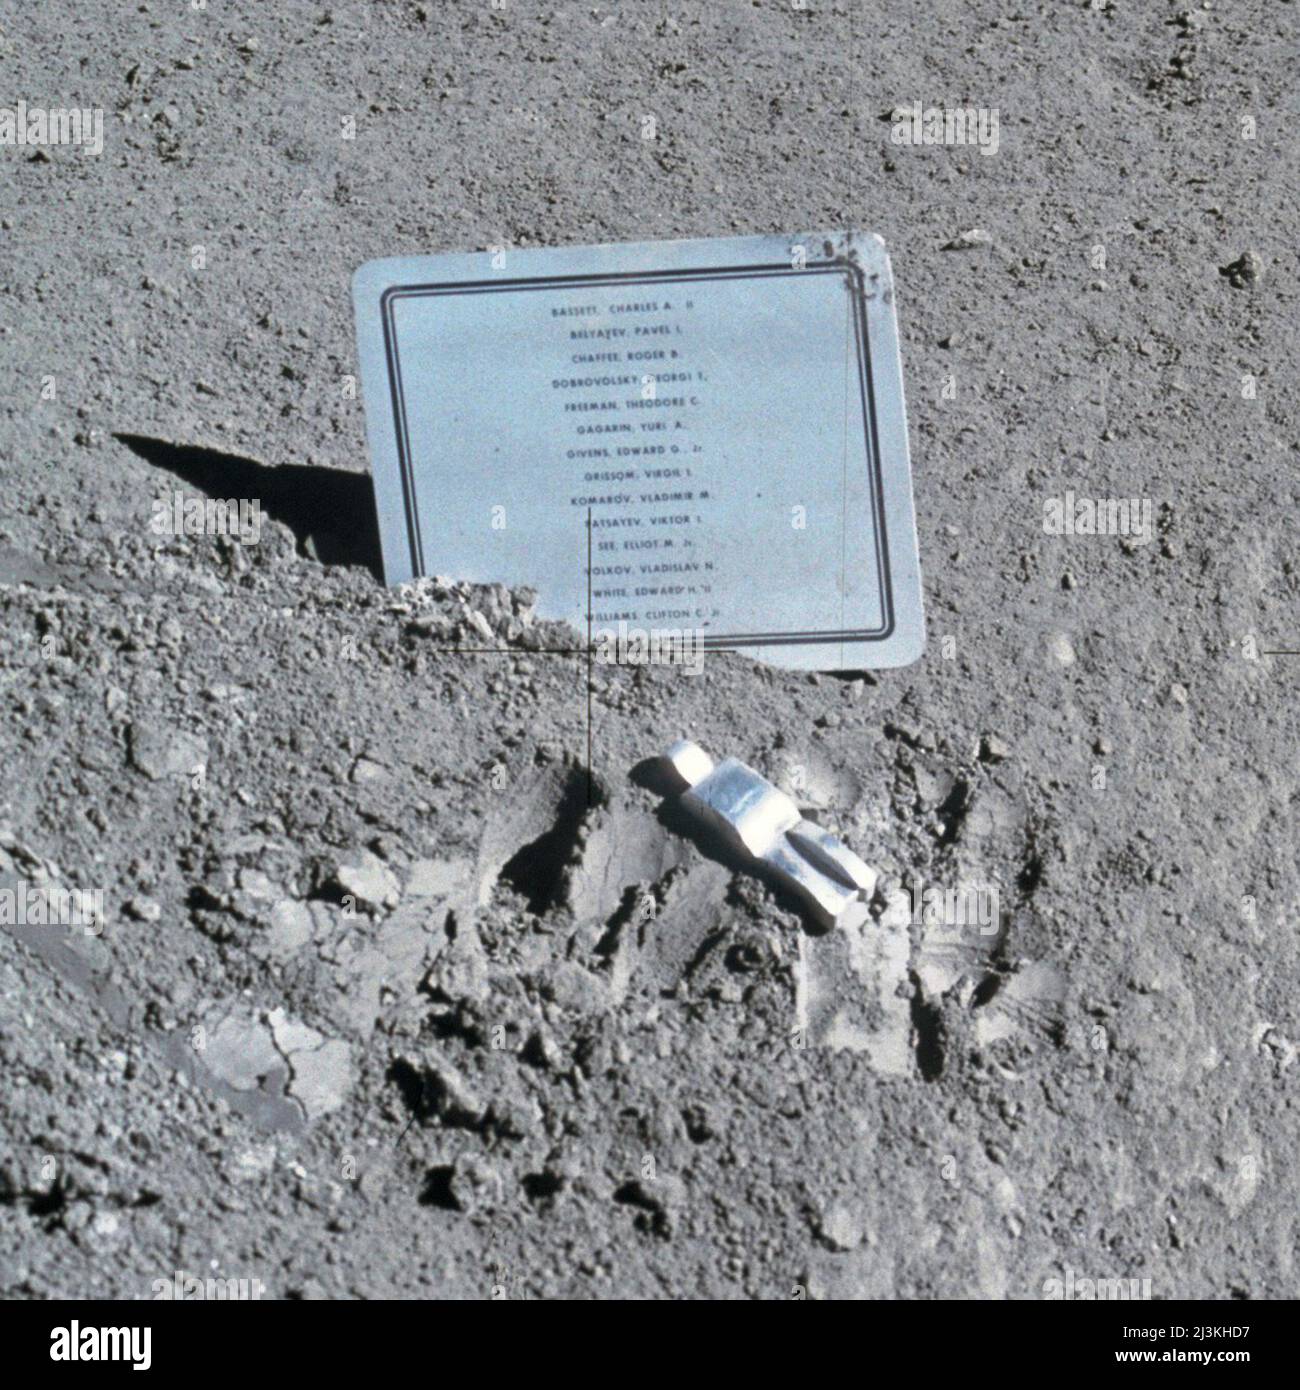 A close-up view of a commemorative plaque left on the Moon at the Hadley-Apennine landing site in memory of 14 NASA astronauts and USSR cosmonauts, now deceased. Their names are inscribed in alphabetical order on the plaque. The plaque was stuck in the lunar soil by Astronauts David Scott and James Irwin during their Apollo 15 expedition. Stock Photo